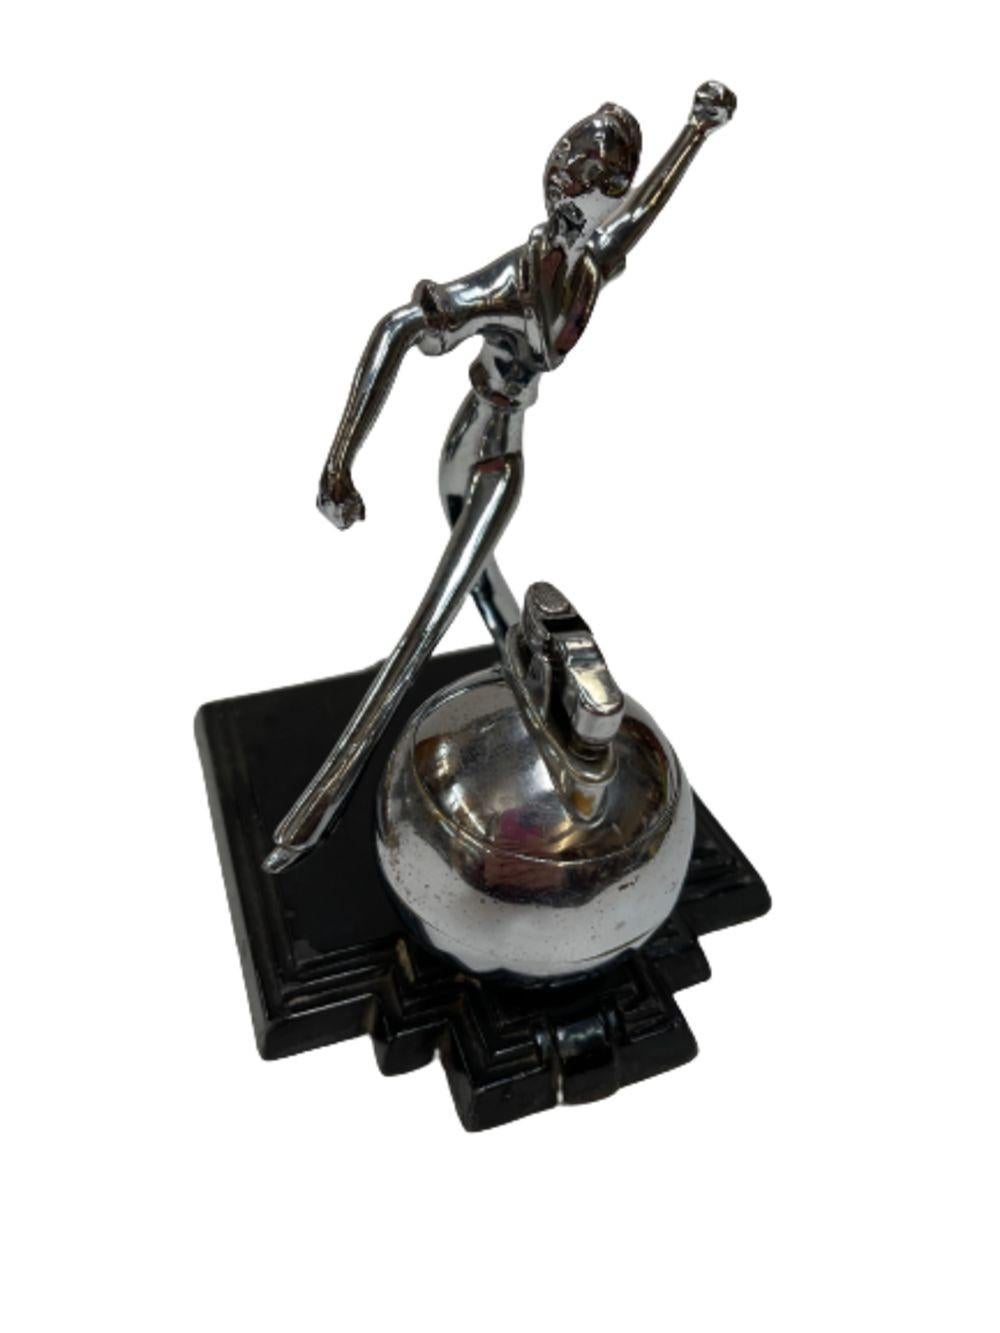 American Art Deco Ball Player Table Table Lighter with Base by Ronson For Sale